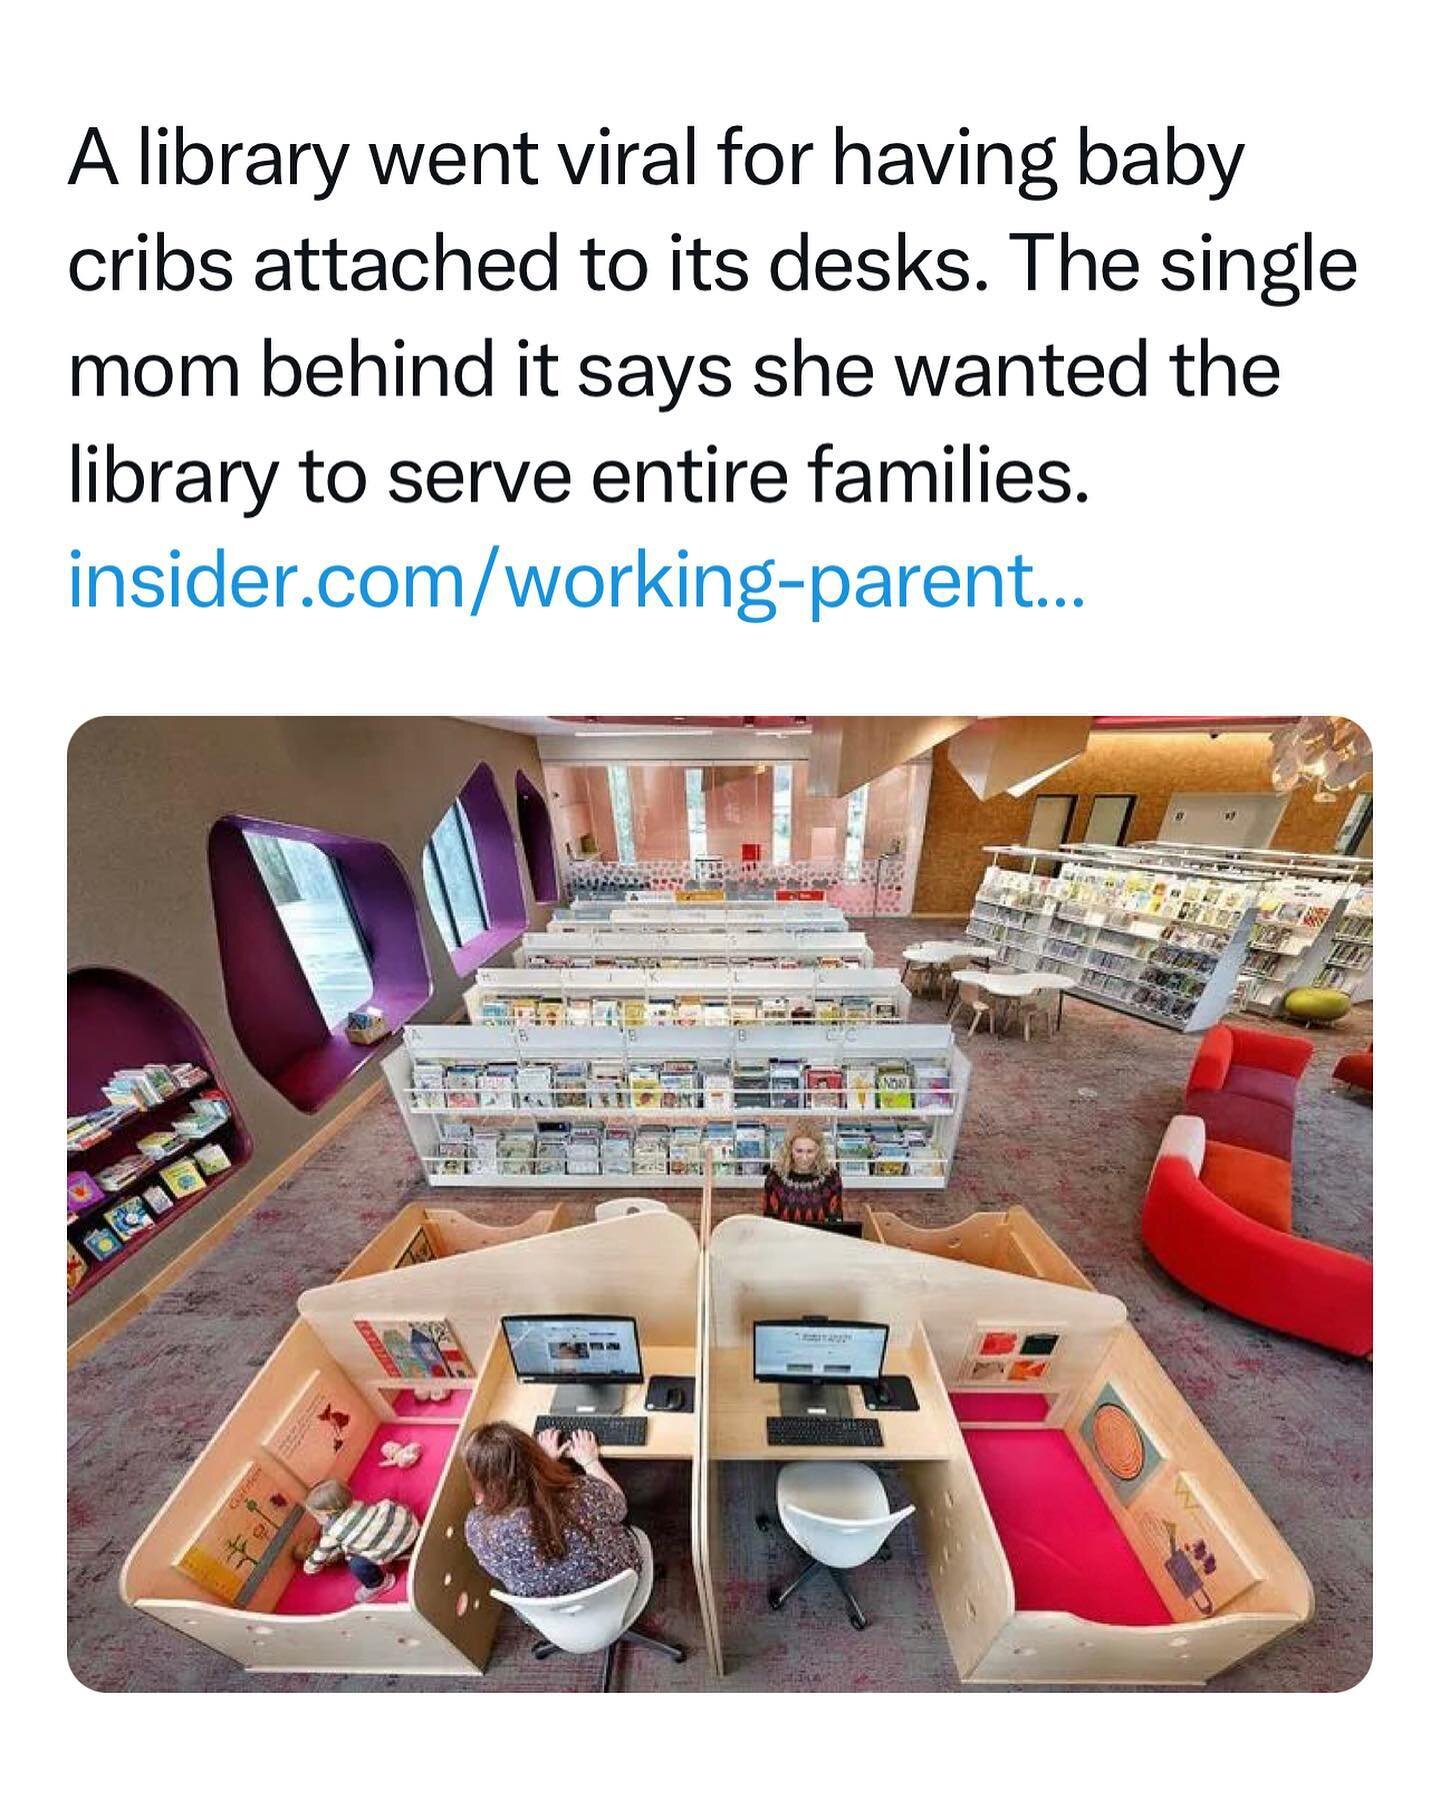 Great #design! Supporting families is a great example of #healthdesign https://www.insider.com/working-parents-viral-desk-librarian-single-mom-2023-3